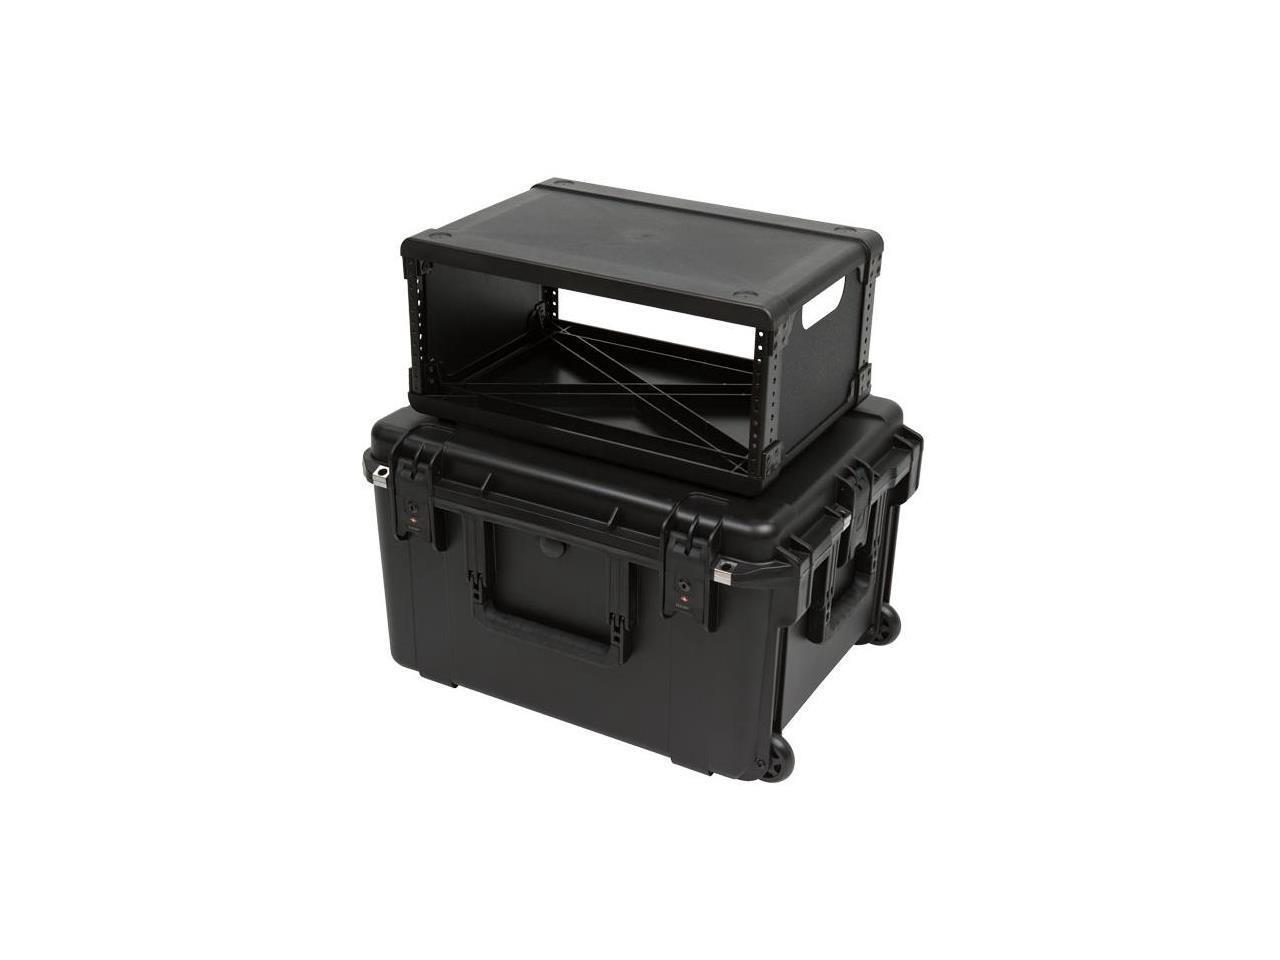 Skb Iseries Case With Removable 4U Injection Molded Rack Cage #3I-2217M124U